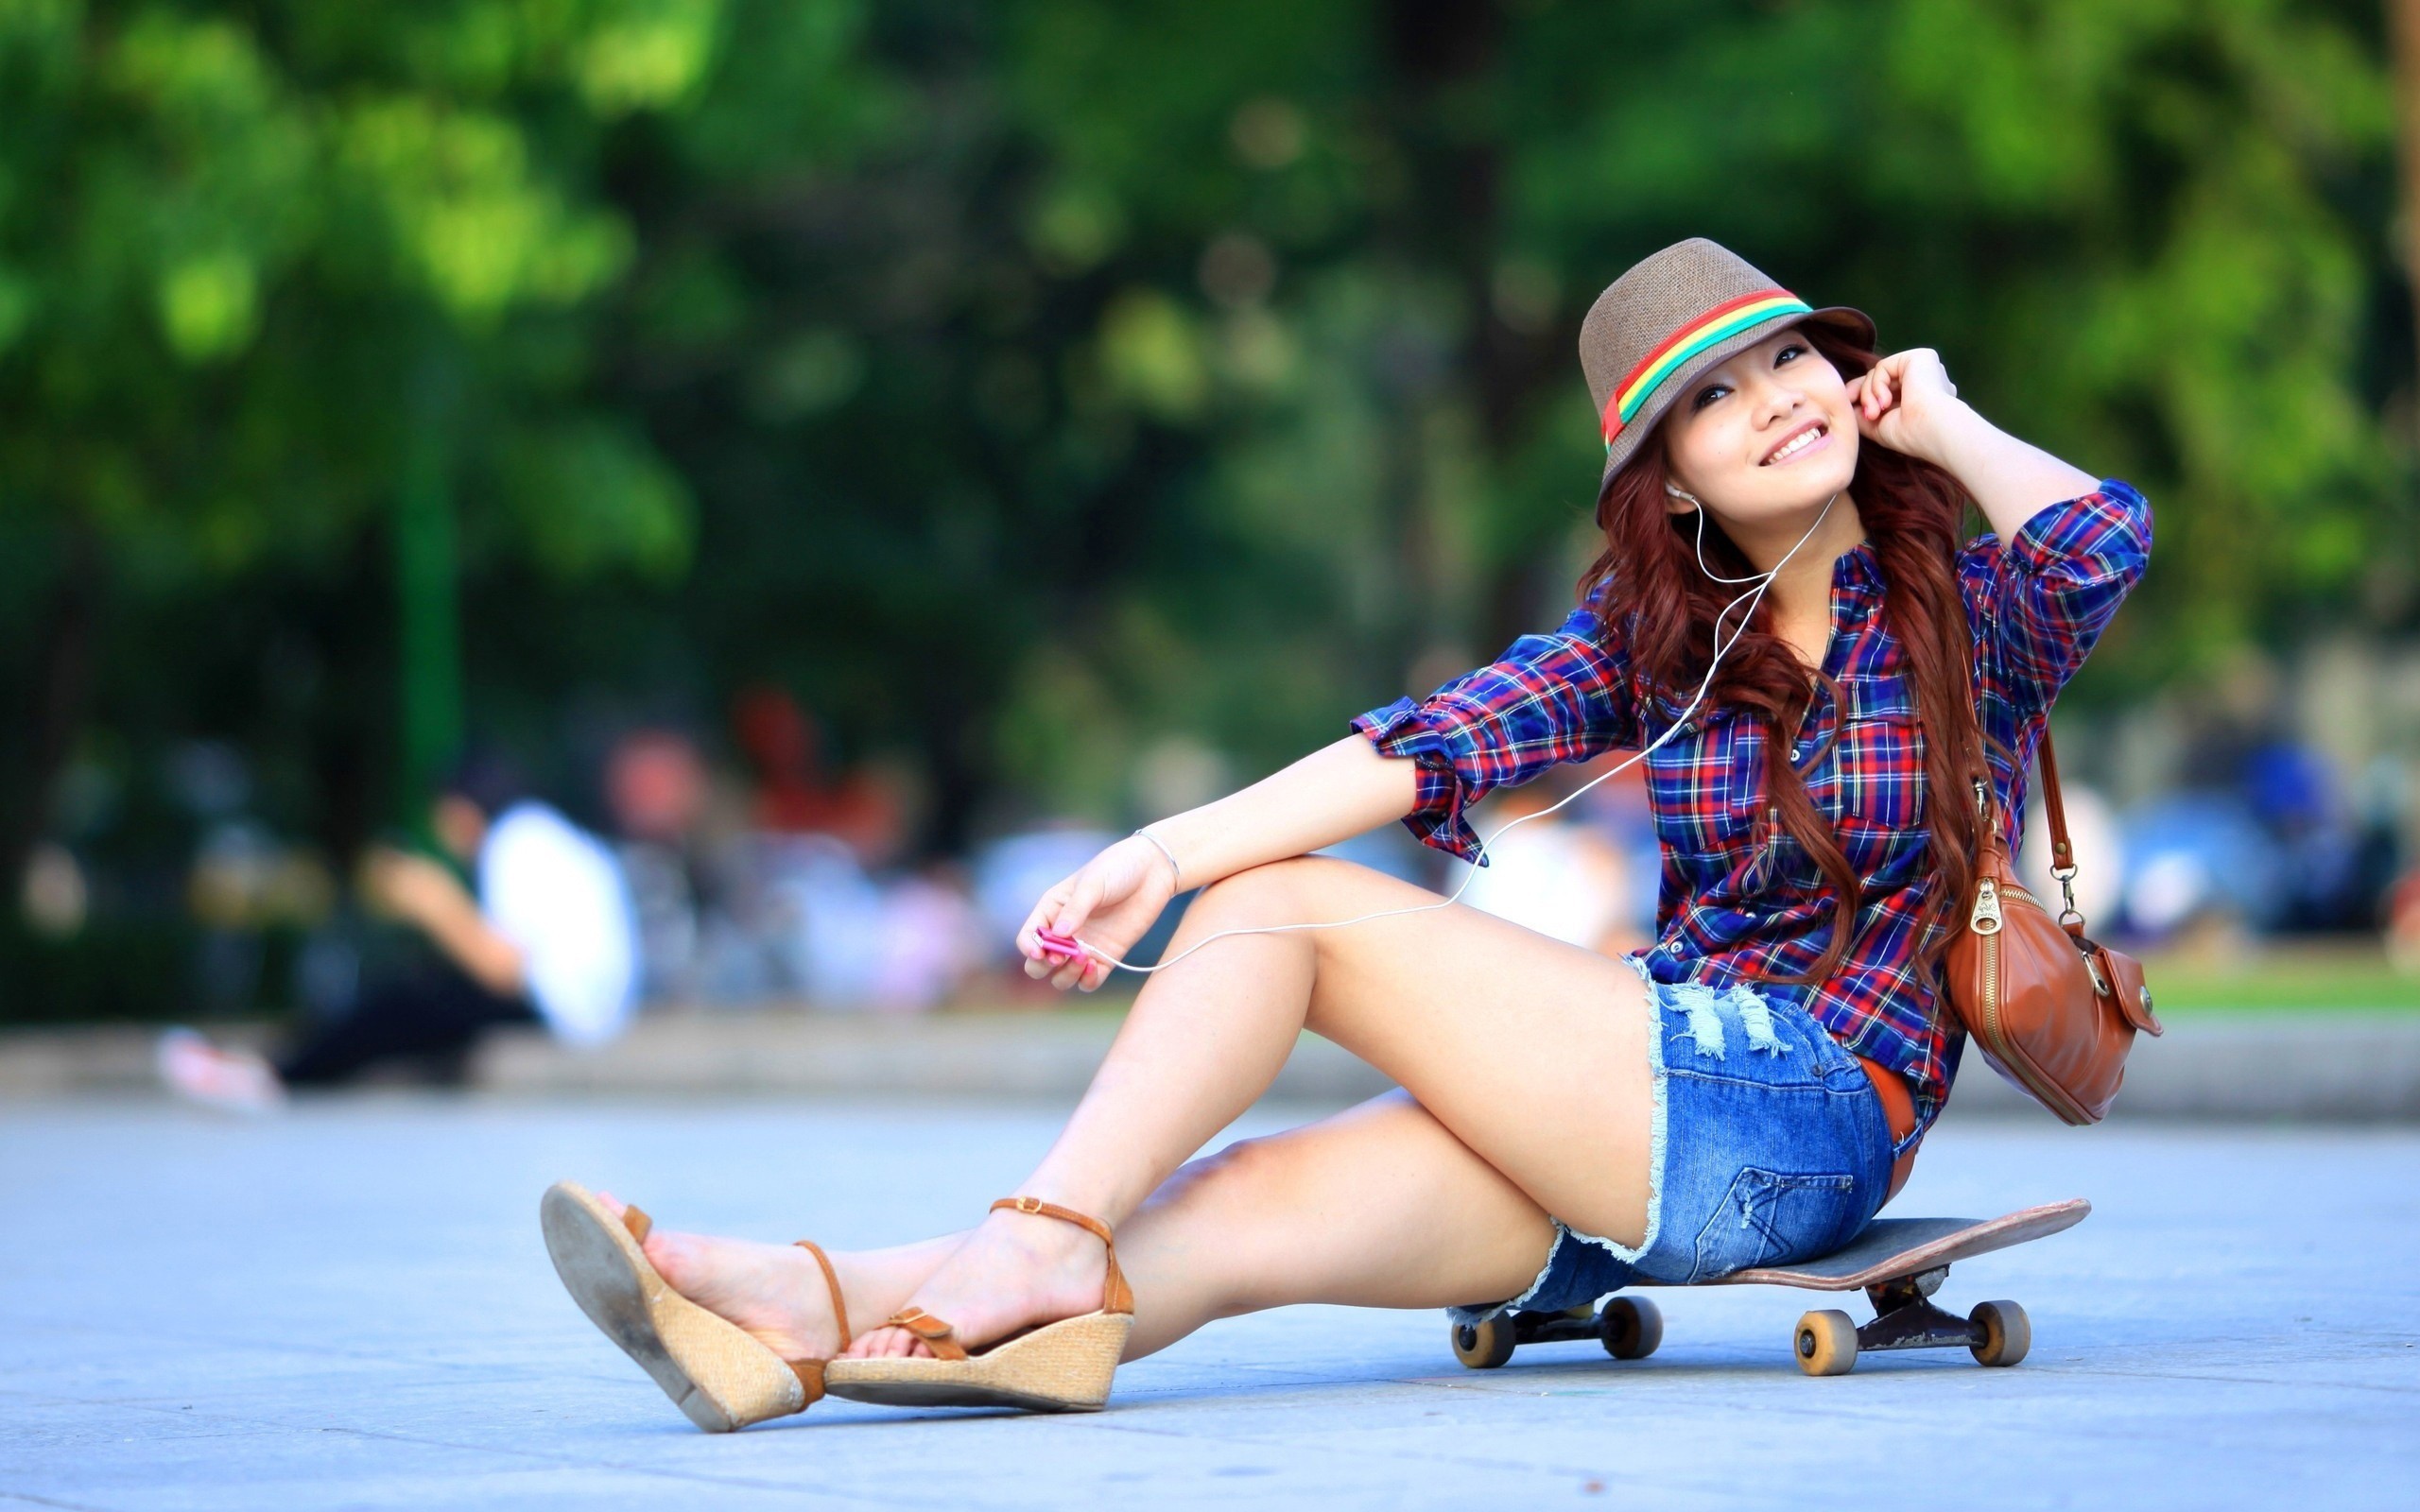 The Girl Is Sitting On A Skateboard Wallpapers And Images Wallpapers Pictures Photos